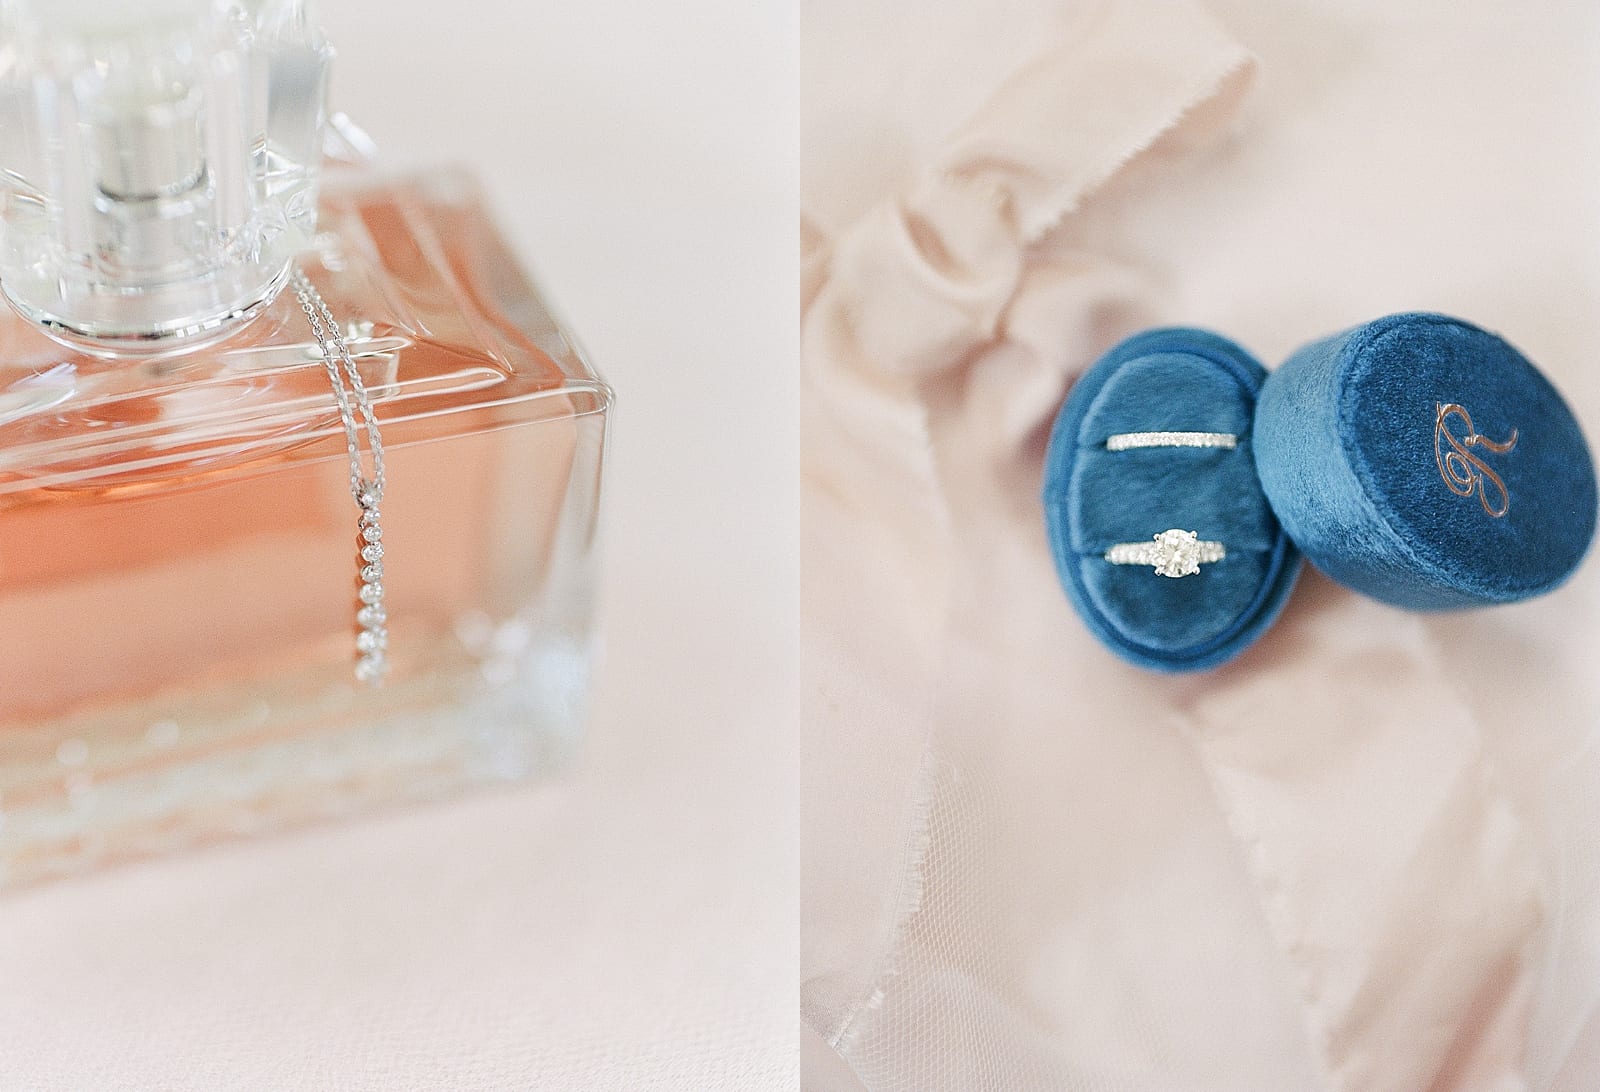 Perfume with Necklace and Rings in Blue Box Photos